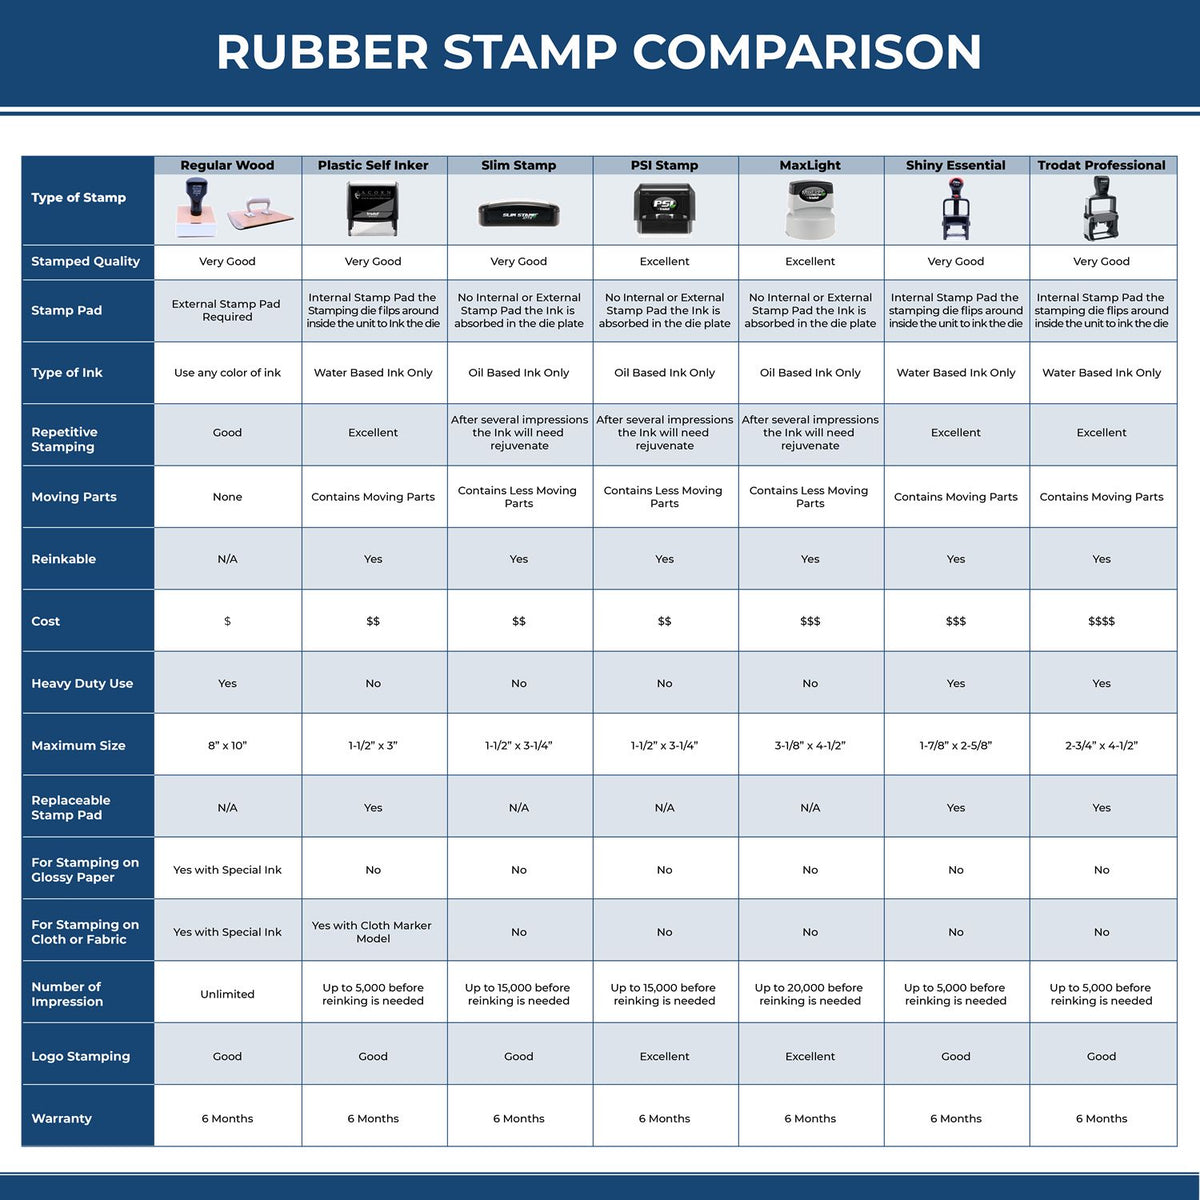 Self-Inking Classified Stamp 4162S Rubber Stamp Comparison